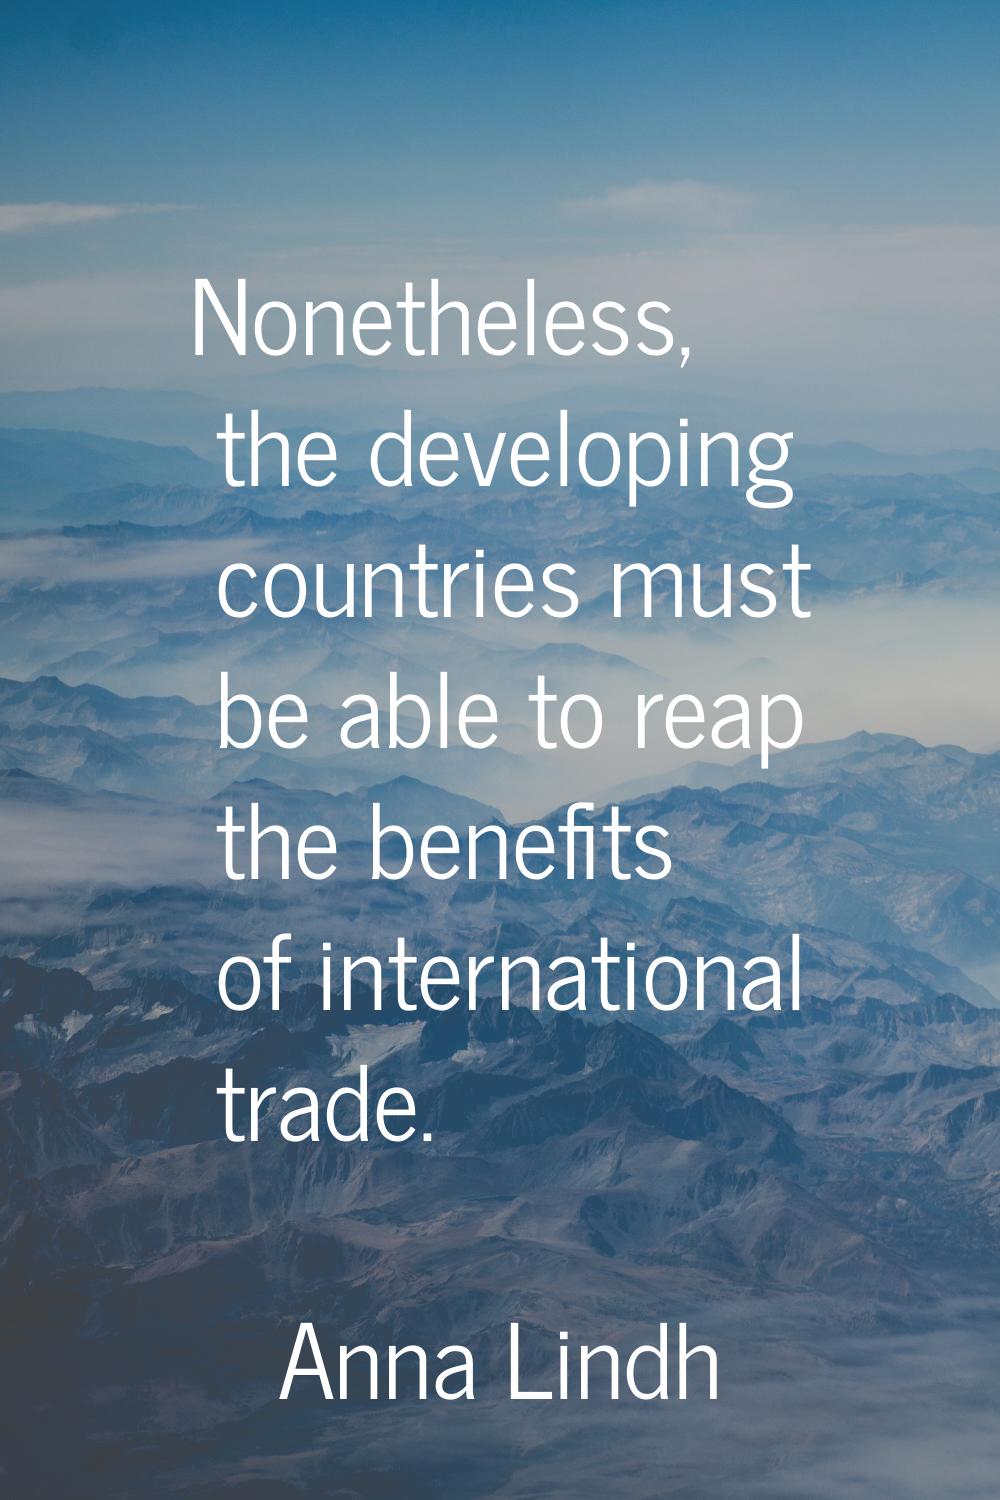 Nonetheless, the developing countries must be able to reap the benefits of international trade.